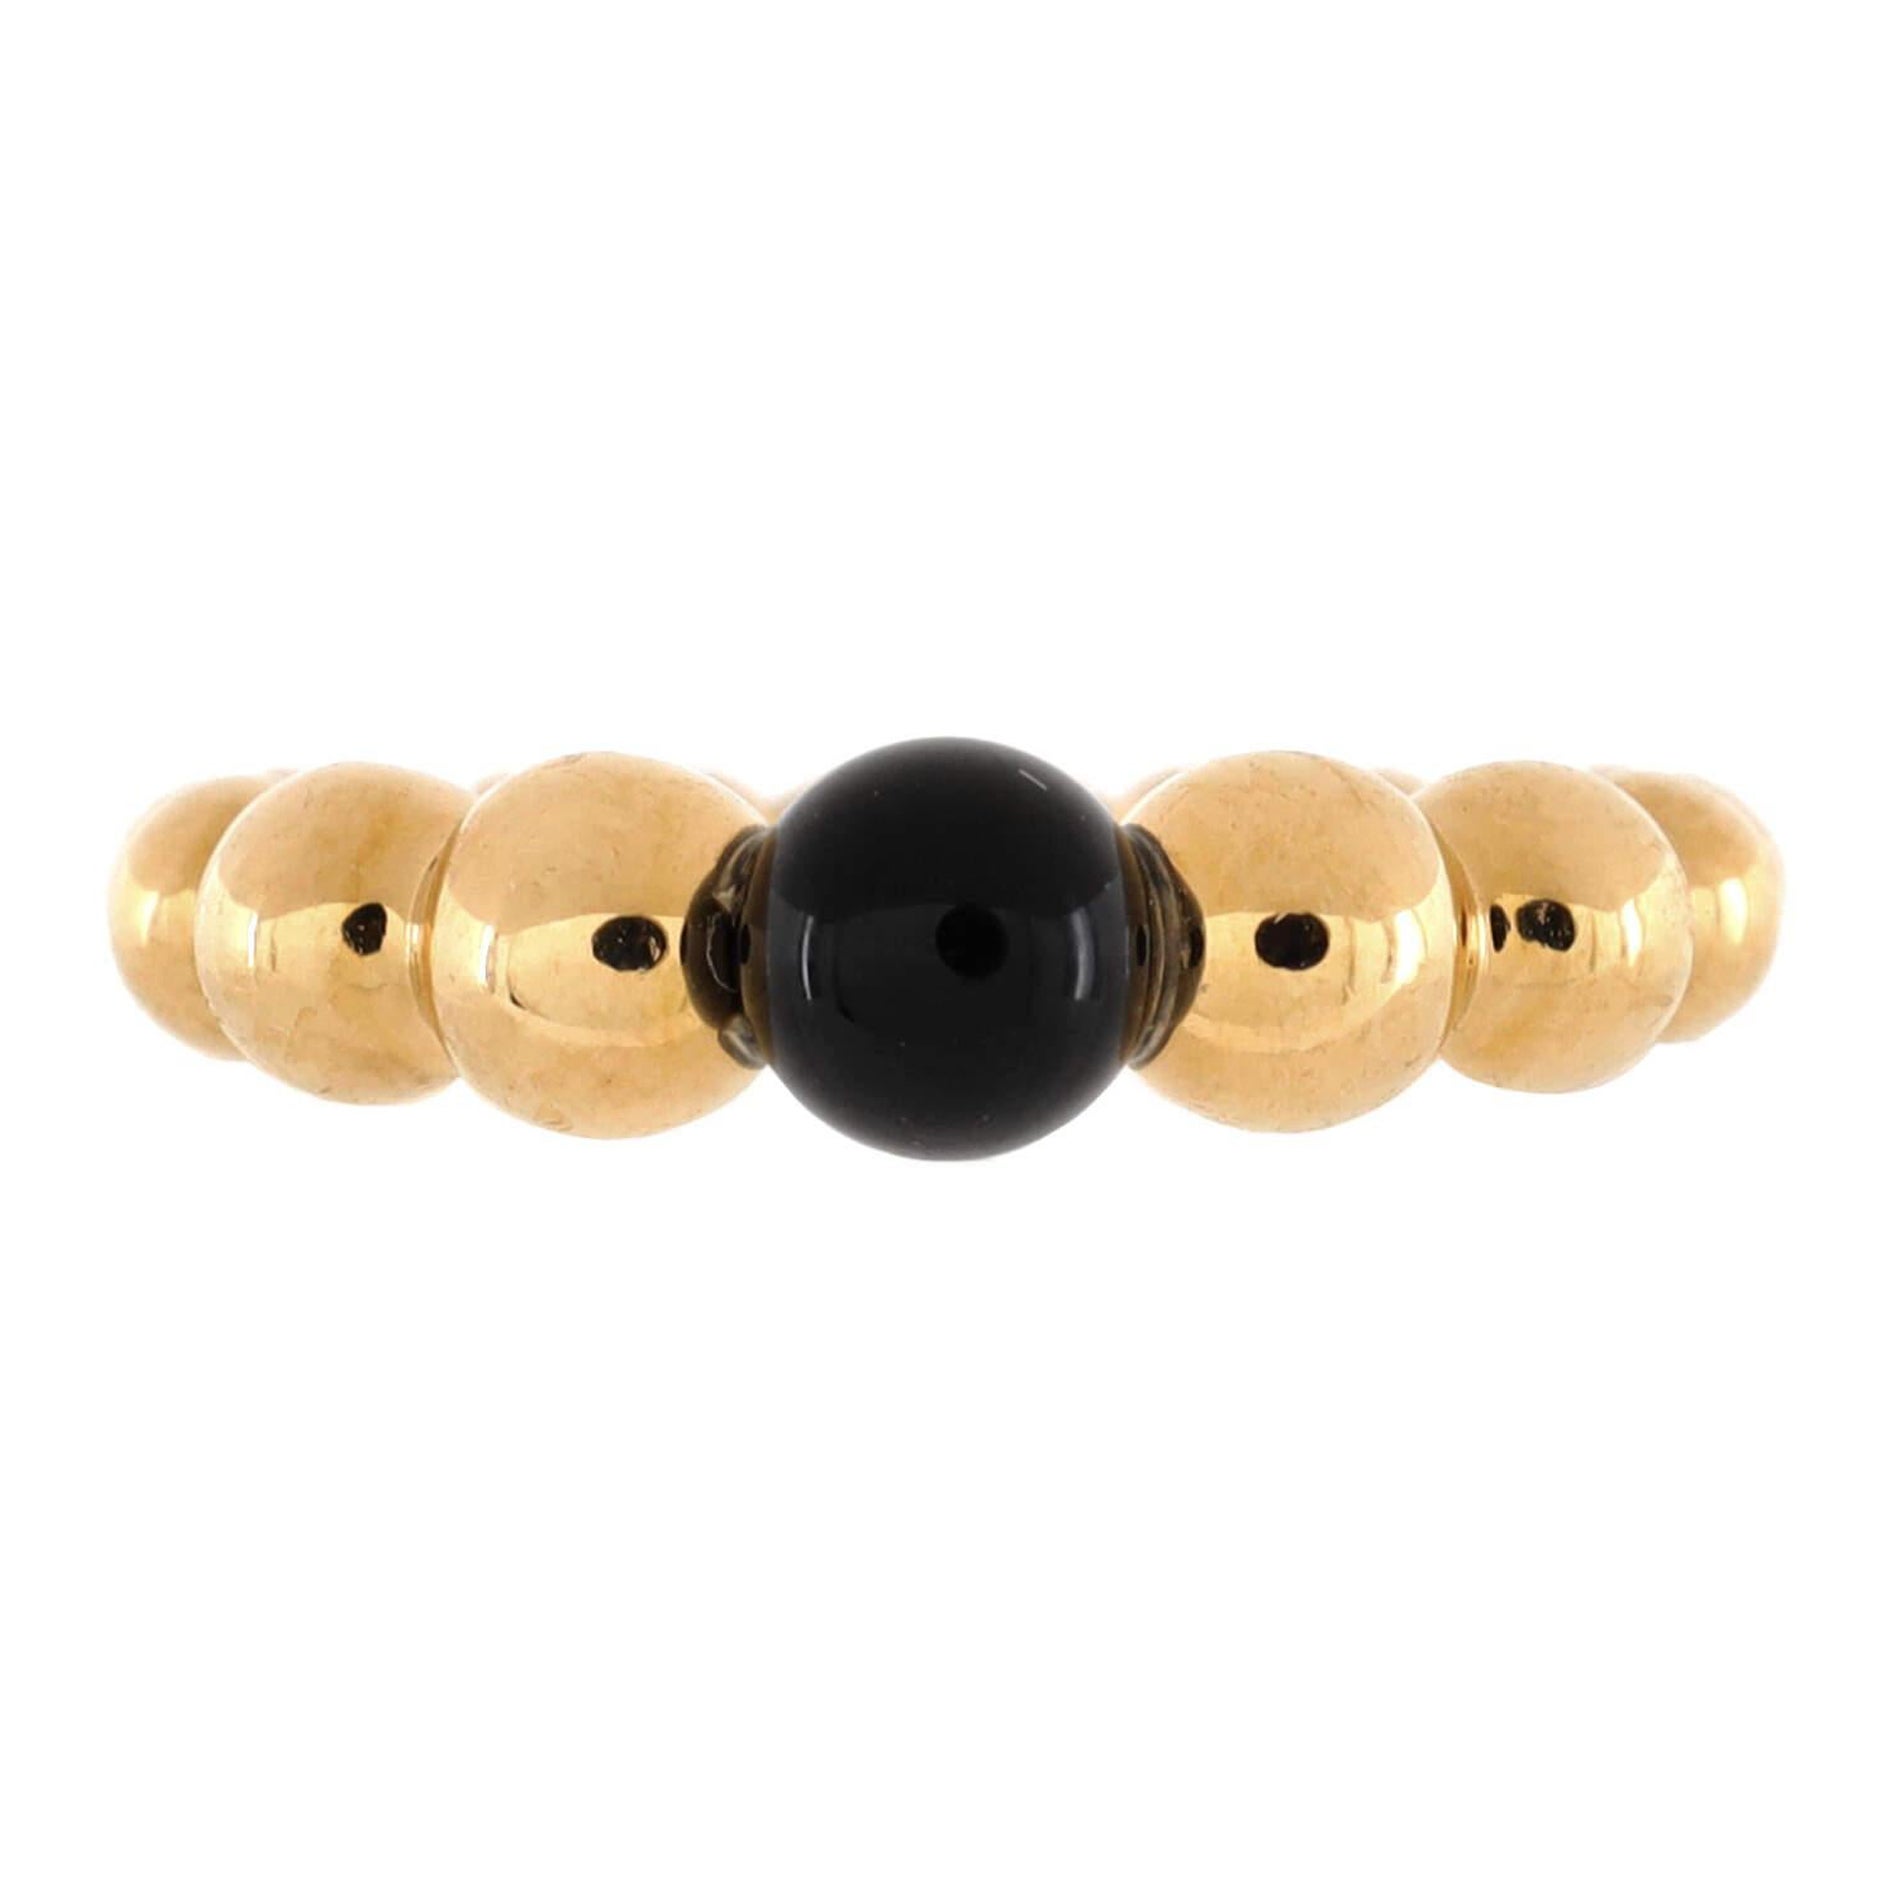 Van Cleef & Arpels Perlee Couleurs Variation Ring 18k Yellow Gold with Onyx